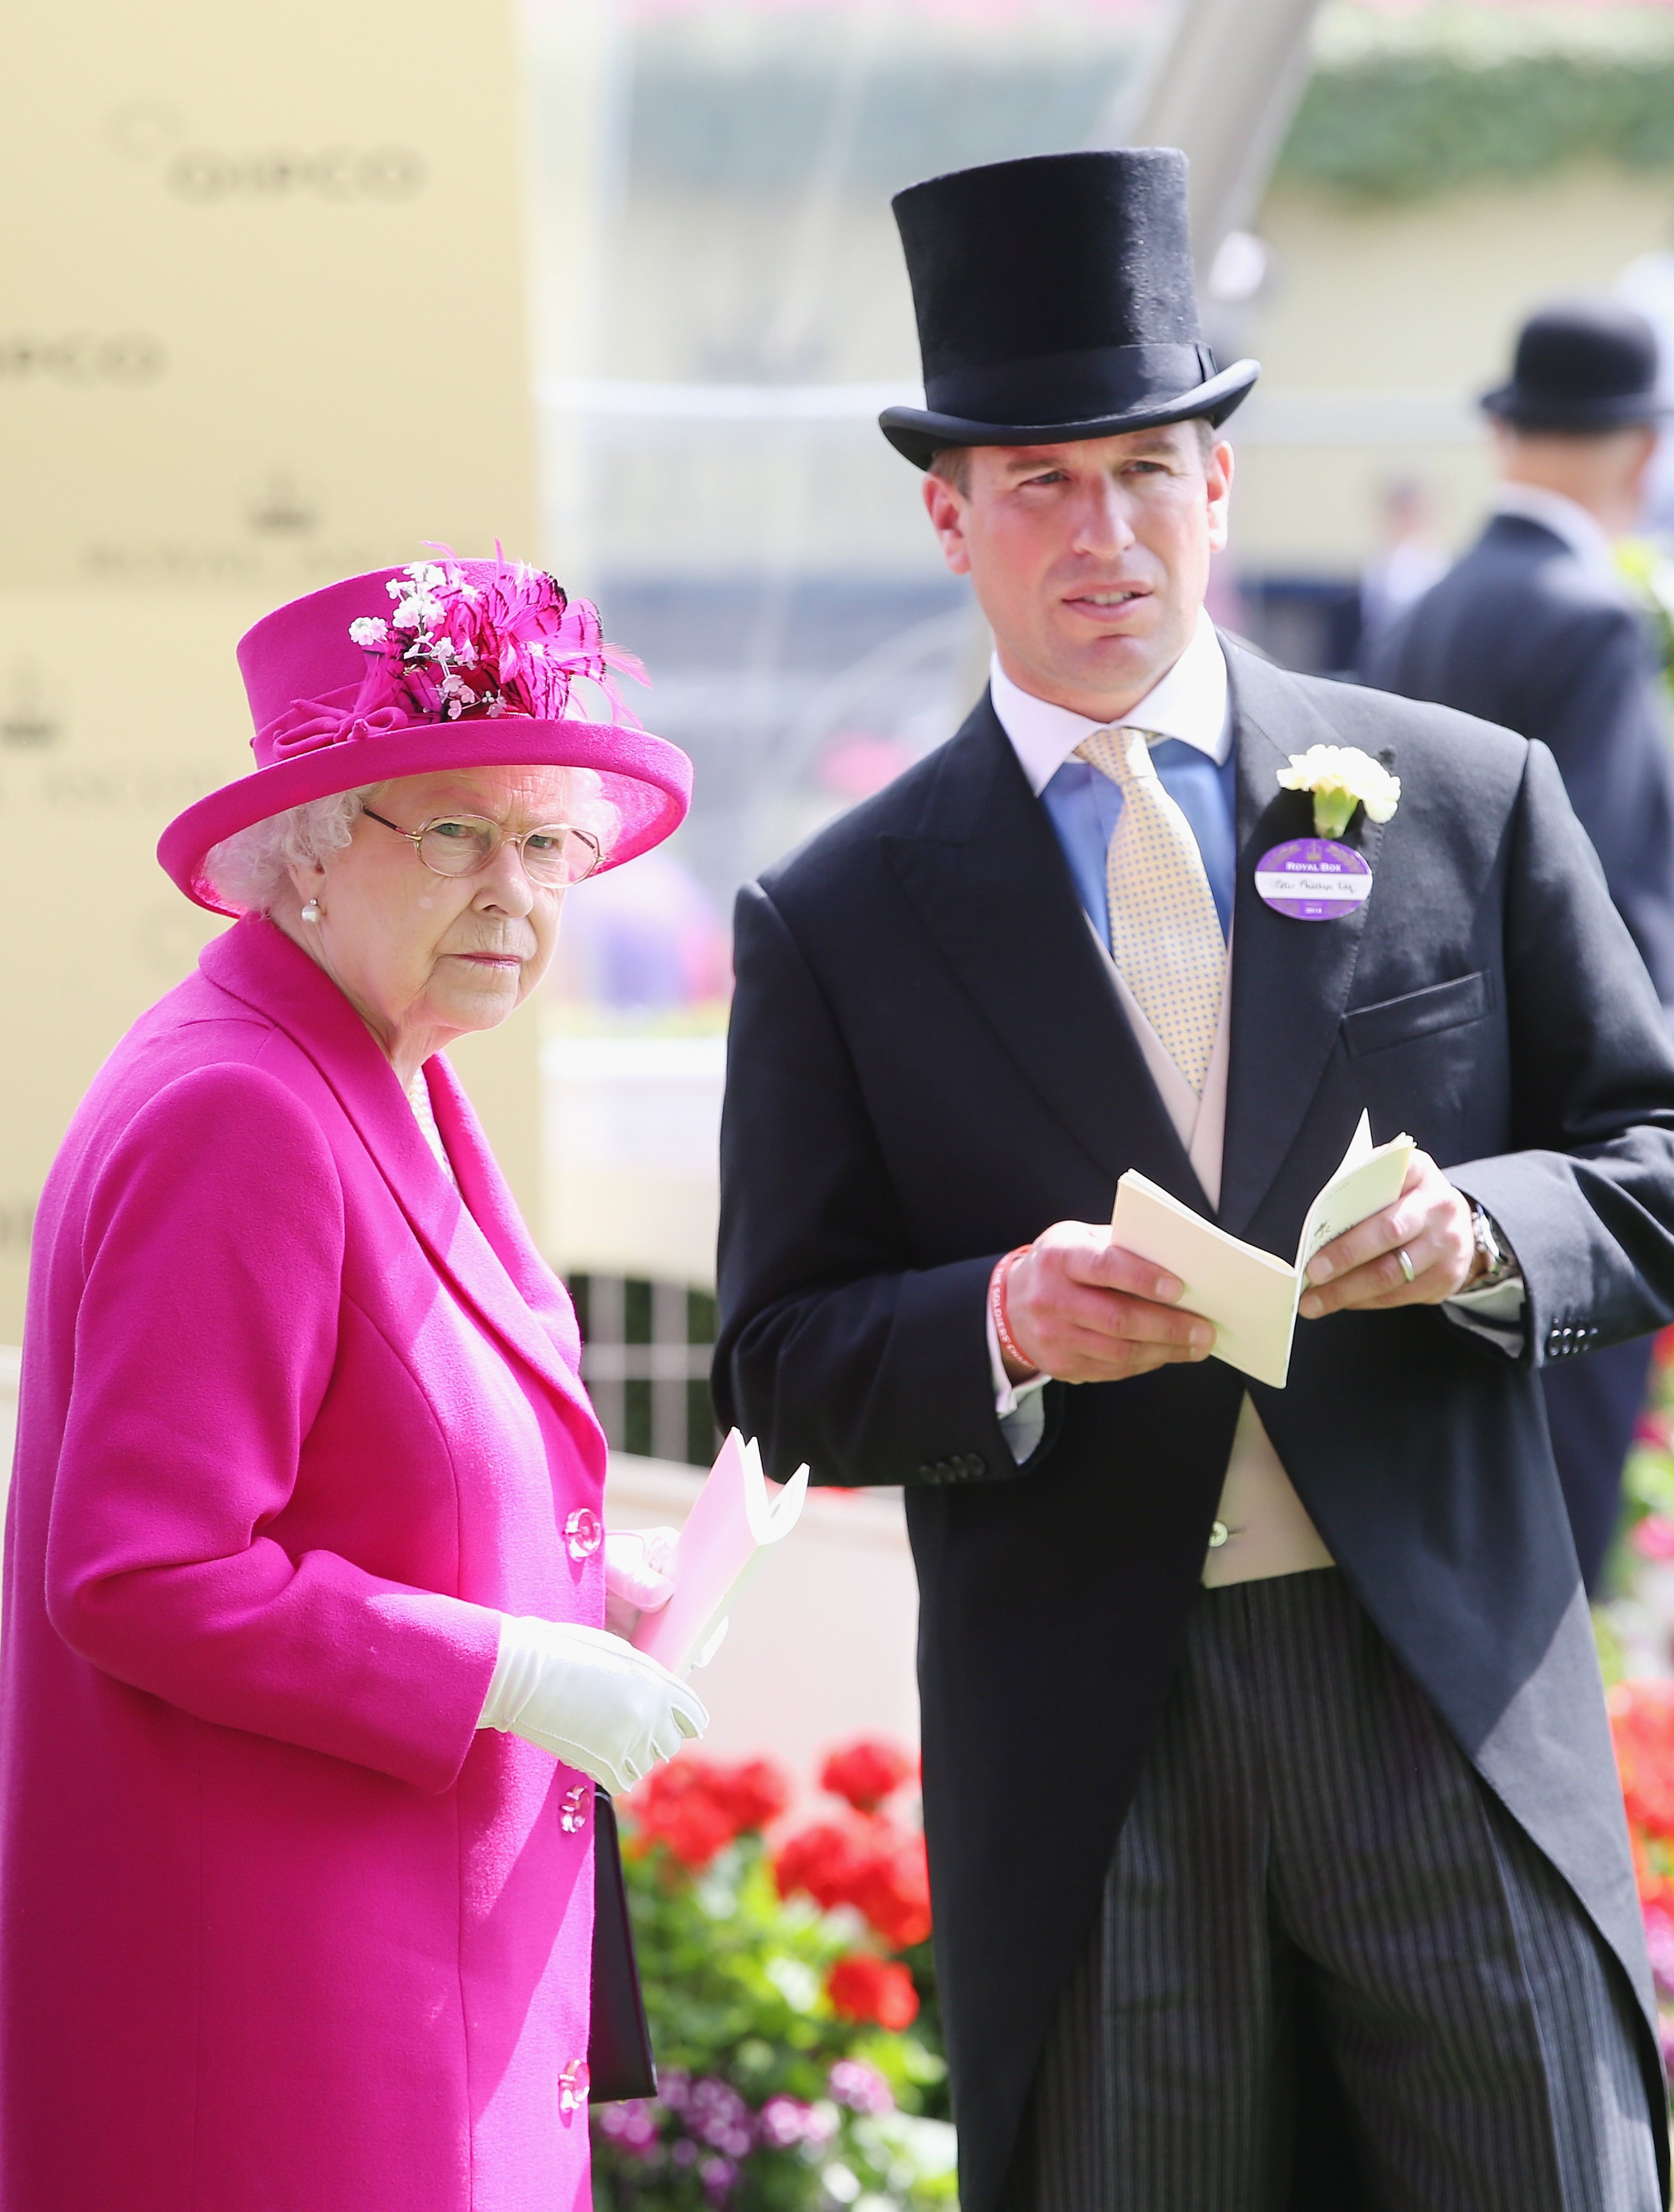 Queen Elizabeth and Peter Phillips attend day four of Royal Ascot 2014 at Ascot Racecourse in 2014 in Ascot, England. Photo: Getty Images for Ascot Racecourse